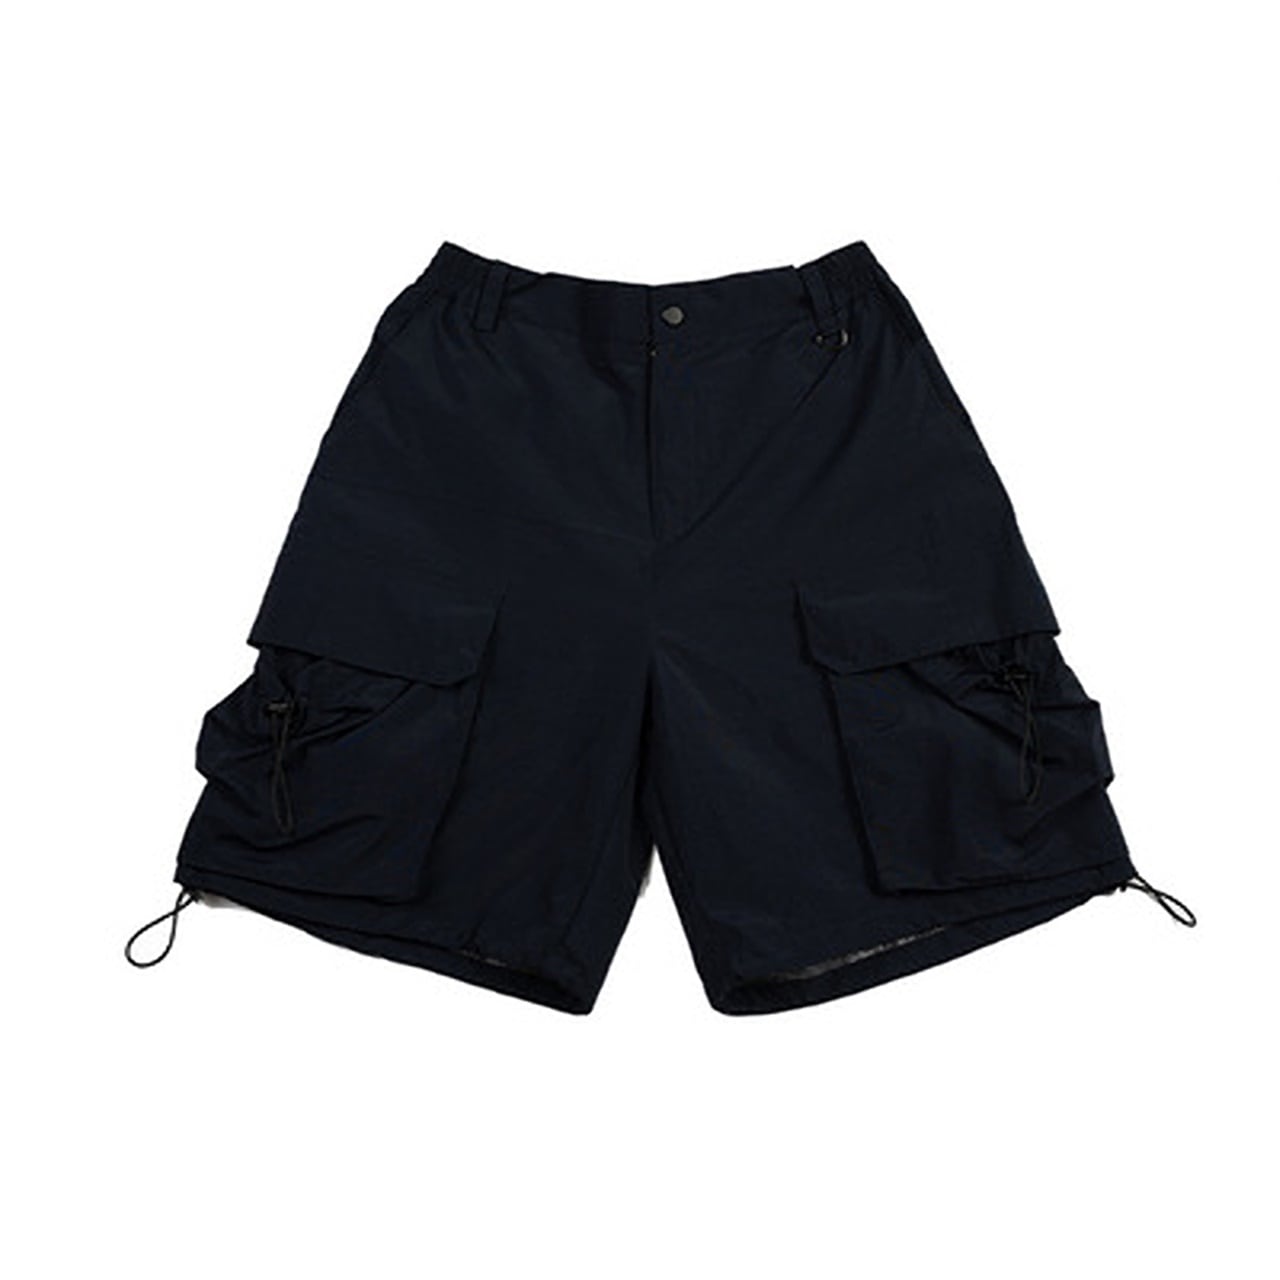 Outdoor shorts HL1690